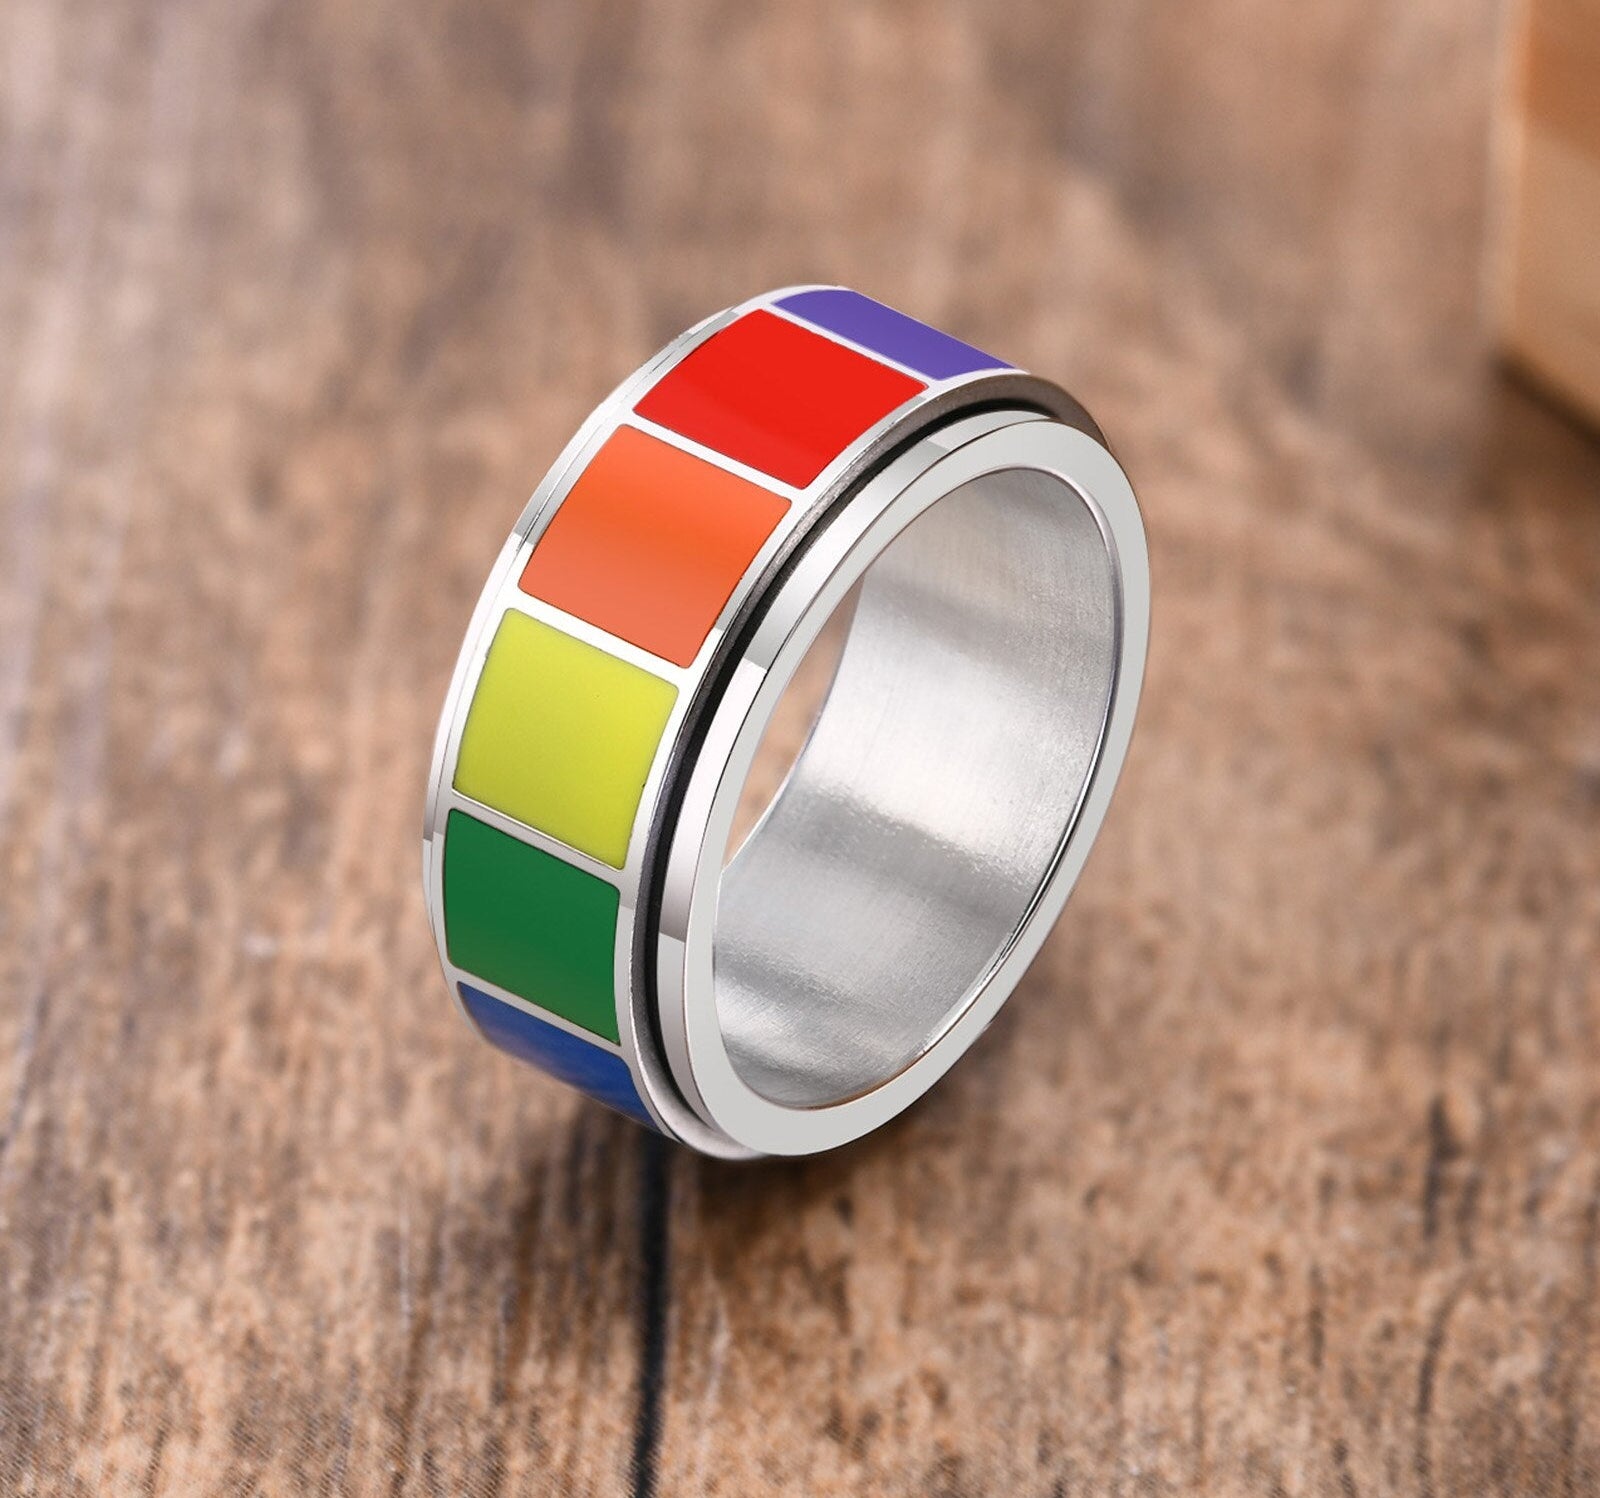 Vnox Rock Spinner Rainbow Color Wedding Rings for Men Women,Stainless Steel Metal 2 Layers Bands, 8MM Wide US Size,LGBTQ Jewelry 0 The Autistic Innovator 7 Silver 